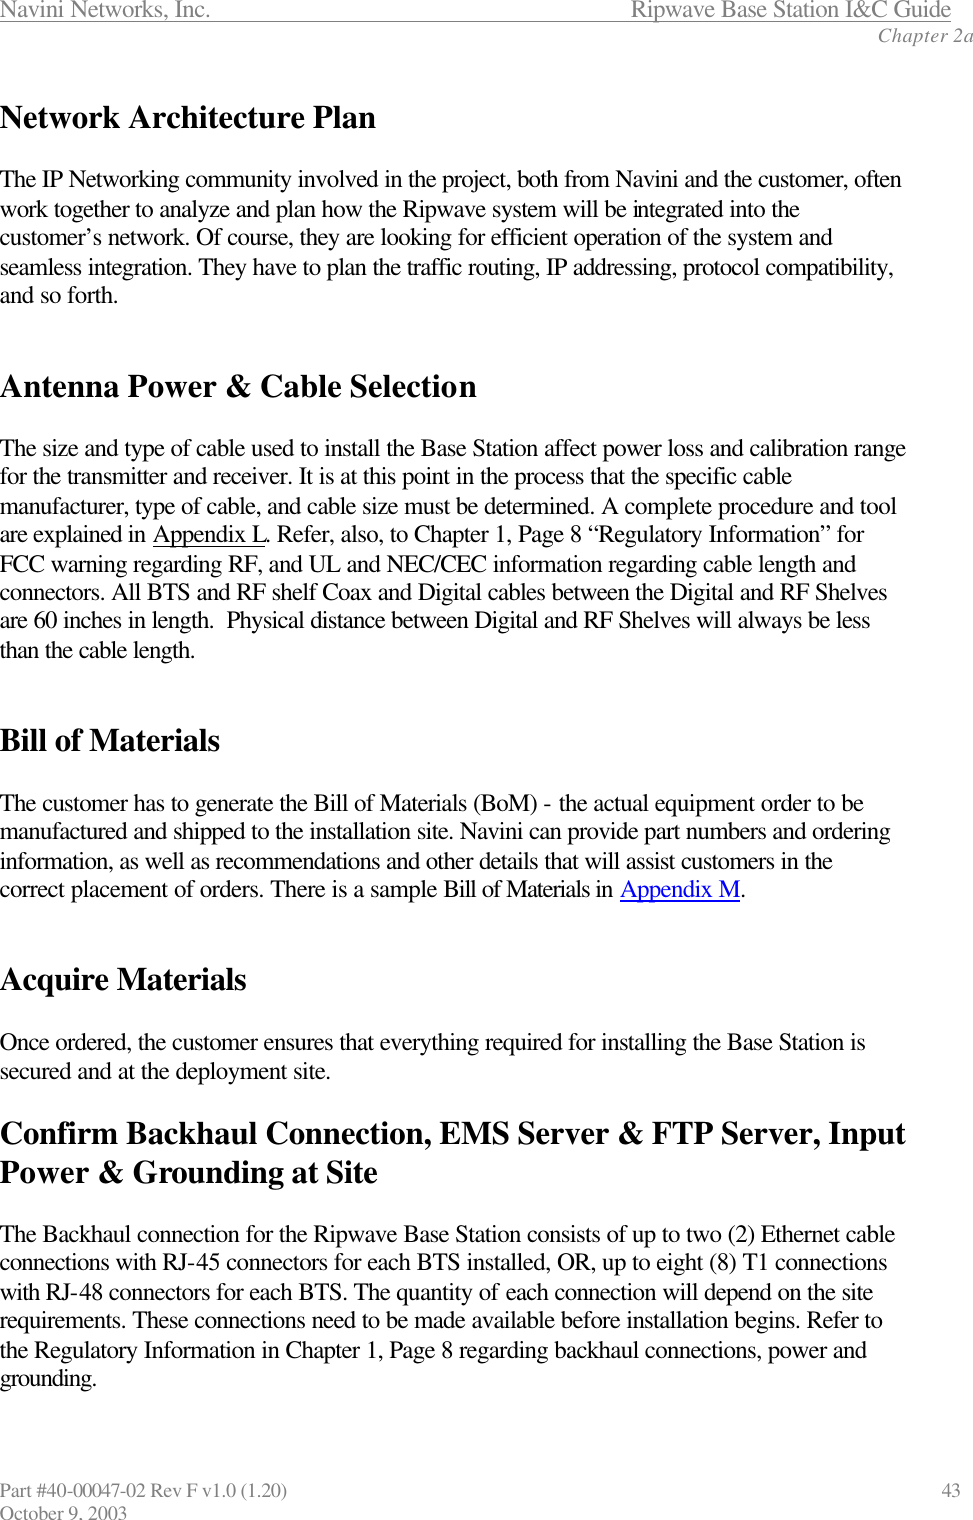 Navini Networks, Inc.                      Ripwave Base Station I&amp;C Guide Chapter 2a Part #40-00047-02 Rev F v1.0 (1.20)                             43 October 9, 2003  Network Architecture Plan  The IP Networking community involved in the project, both from Navini and the customer, often work together to analyze and plan how the Ripwave system will be integrated into the customer’s network. Of course, they are looking for efficient operation of the system and seamless integration. They have to plan the traffic routing, IP addressing, protocol compatibility, and so forth.    Antenna Power &amp; Cable Selection  The size and type of cable used to install the Base Station affect power loss and calibration range for the transmitter and receiver. It is at this point in the process that the specific cable manufacturer, type of cable, and cable size must be determined. A complete procedure and tool are explained in Appendix L. Refer, also, to Chapter 1, Page 8 “Regulatory Information” for FCC warning regarding RF, and UL and NEC/CEC information regarding cable length and connectors. All BTS and RF shelf Coax and Digital cables between the Digital and RF Shelves are 60 inches in length.  Physical distance between Digital and RF Shelves will always be less than the cable length.   Bill of Materials  The customer has to generate the Bill of Materials (BoM) - the actual equipment order to be manufactured and shipped to the installation site. Navini can provide part numbers and ordering information, as well as recommendations and other details that will assist customers in the correct placement of orders. There is a sample Bill of Materials in Appendix M.   Acquire Materials  Once ordered, the customer ensures that everything required for installing the Base Station is secured and at the deployment site.  Confirm Backhaul Connection, EMS Server &amp; FTP Server, Input Power &amp; Grounding at Site  The Backhaul connection for the Ripwave Base Station consists of up to two (2) Ethernet cable connections with RJ-45 connectors for each BTS installed, OR, up to eight (8) T1 connections with RJ-48 connectors for each BTS. The quantity of each connection will depend on the site requirements. These connections need to be made available before installation begins. Refer to the Regulatory Information in Chapter 1, Page 8 regarding backhaul connections, power and grounding. 